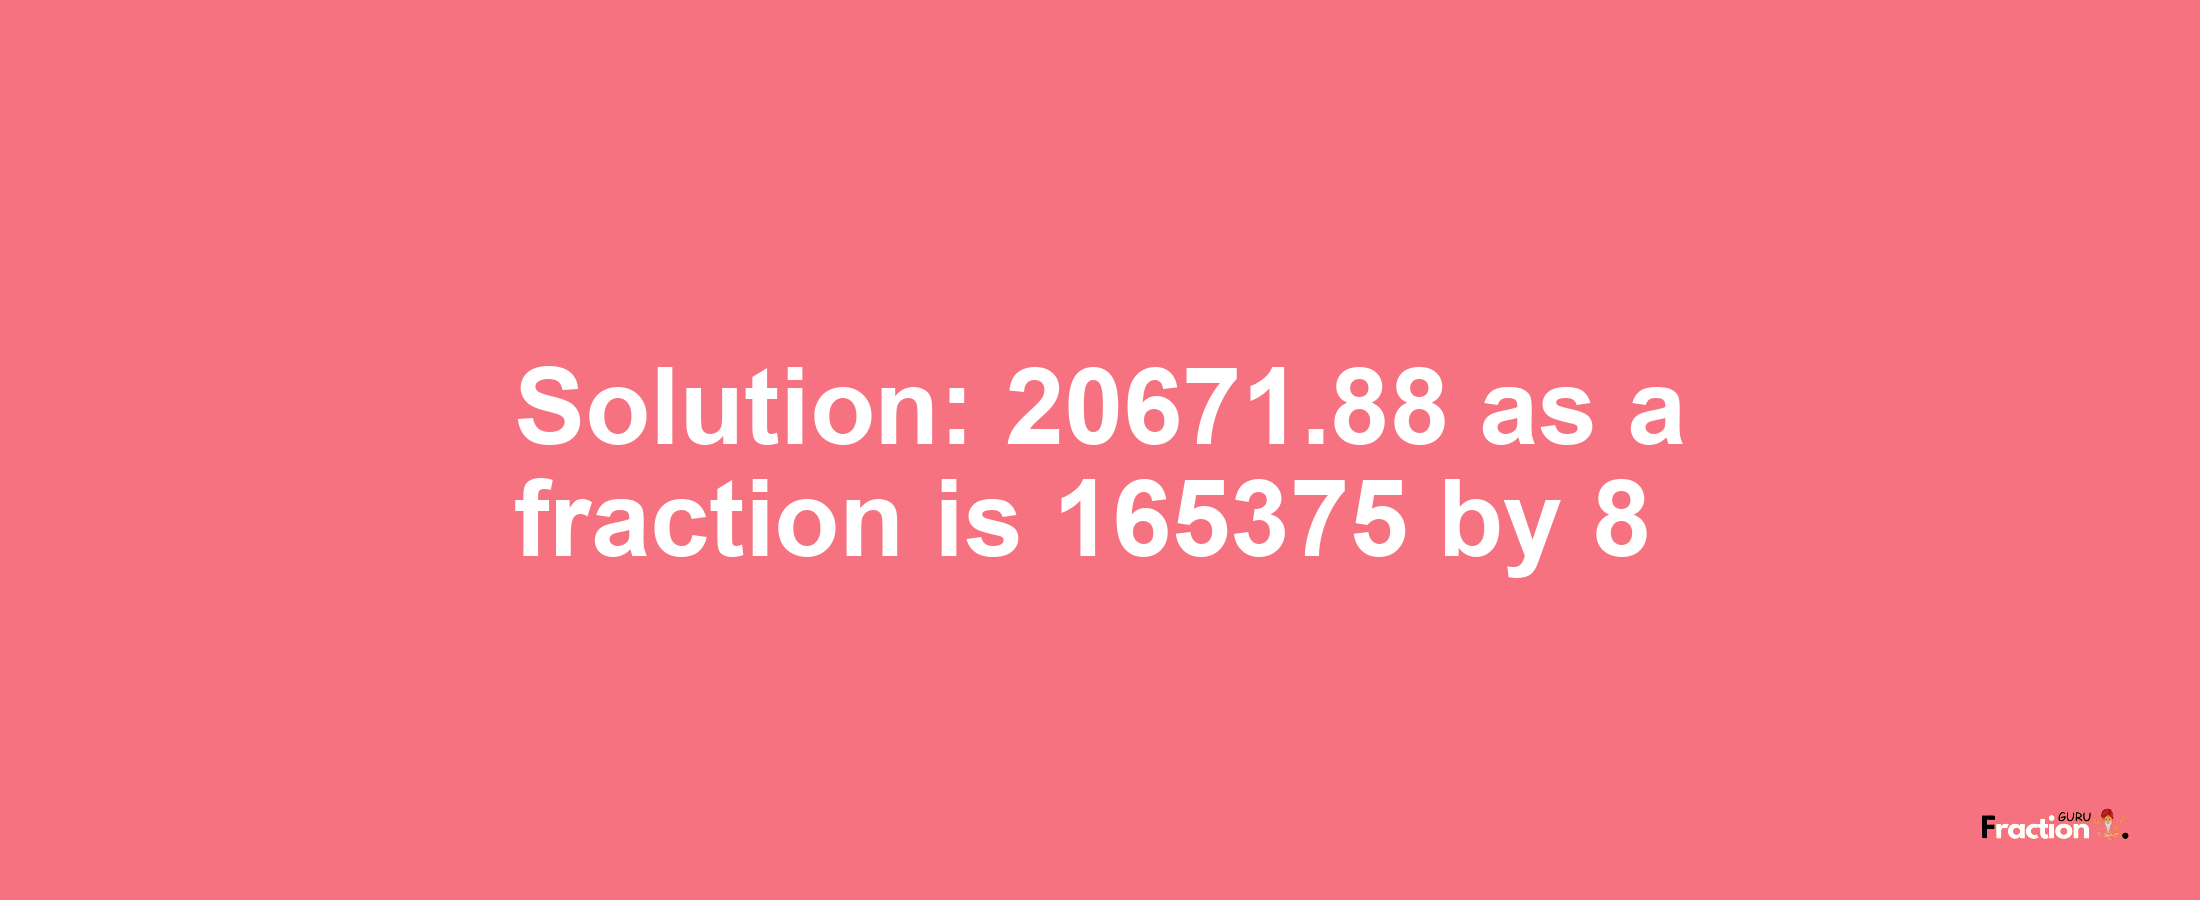 Solution:20671.88 as a fraction is 165375/8